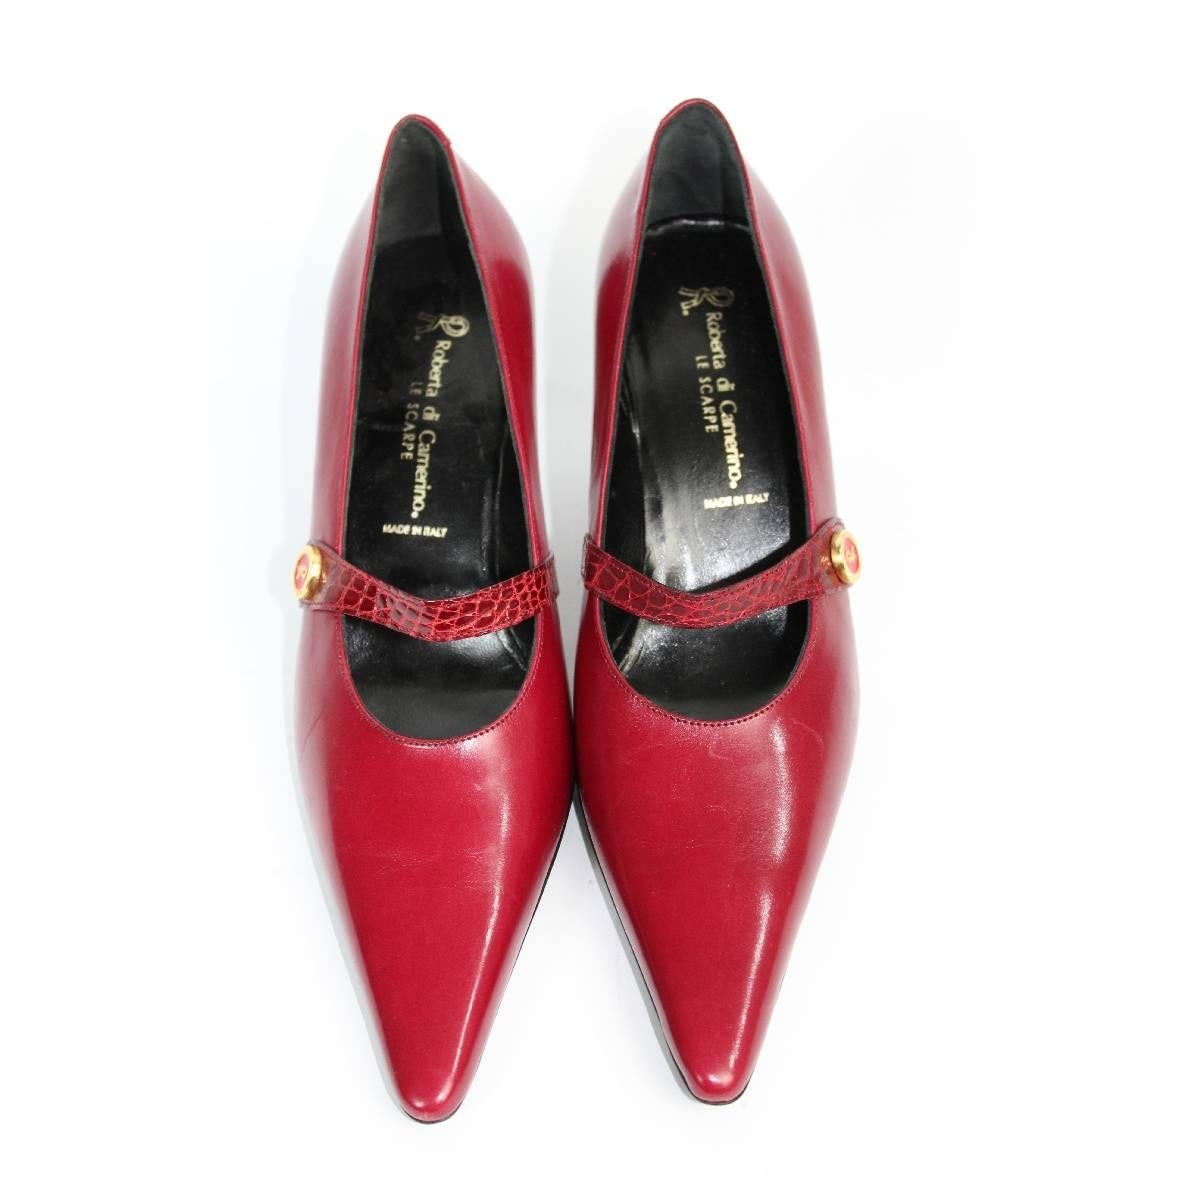 1980s Roberta Di Camerino Red Leather Hells Pumps Shoes In New Condition For Sale In Brindisi, IT